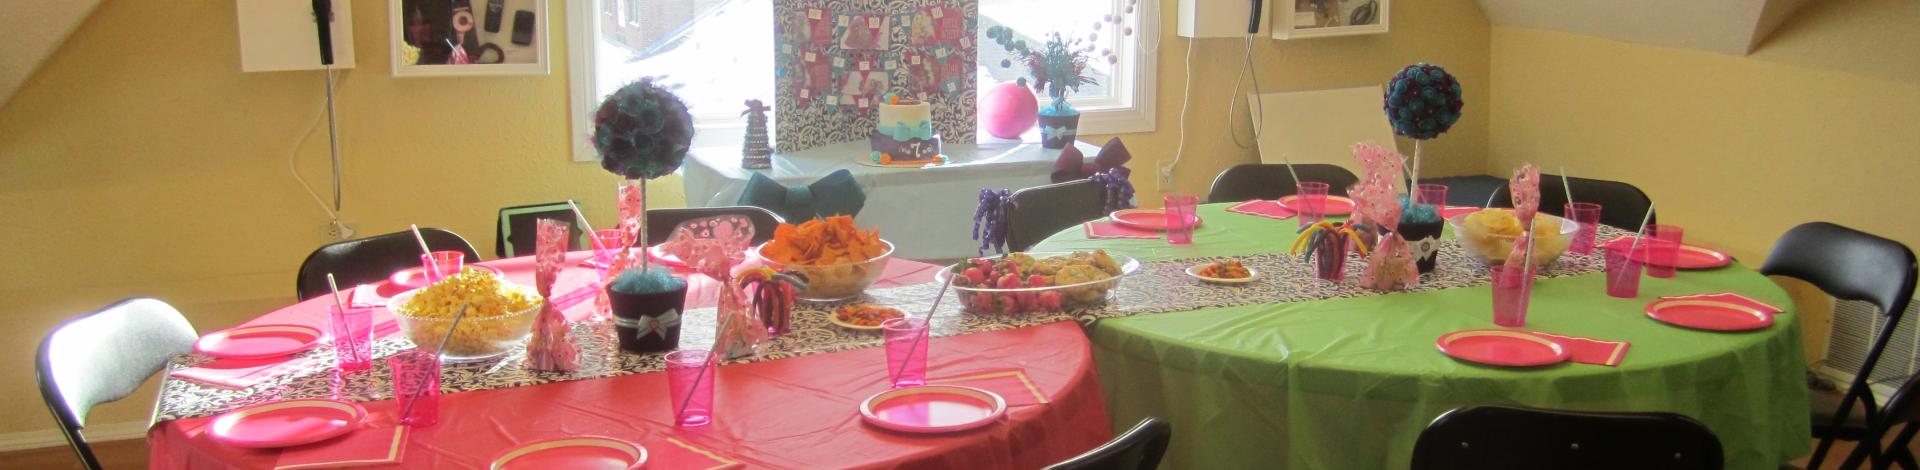 Two round tables with pink and green tablecloths set up for a birthday part with paper plates and pink and green decorations.